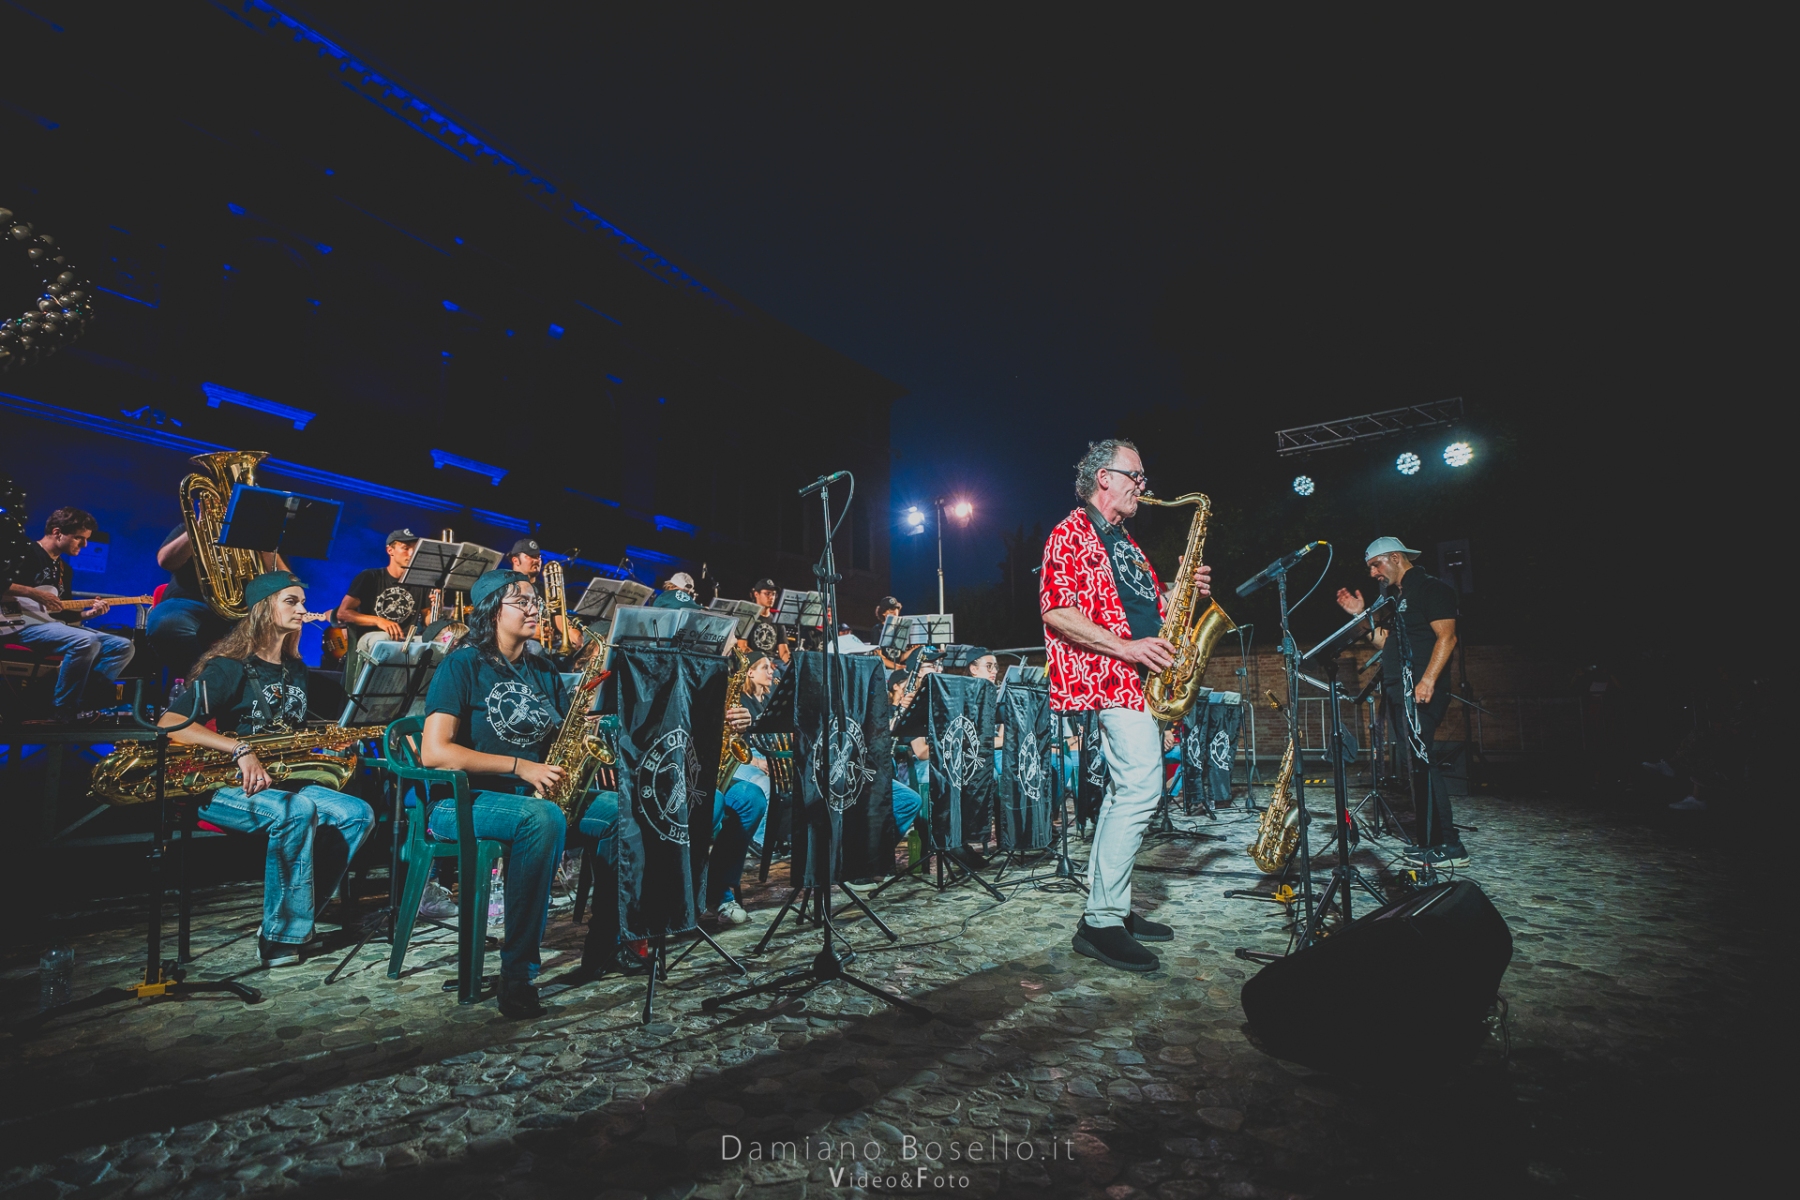 100-CHRIS-COLLINS-BE-ON-STAGE-Big-band-16mm